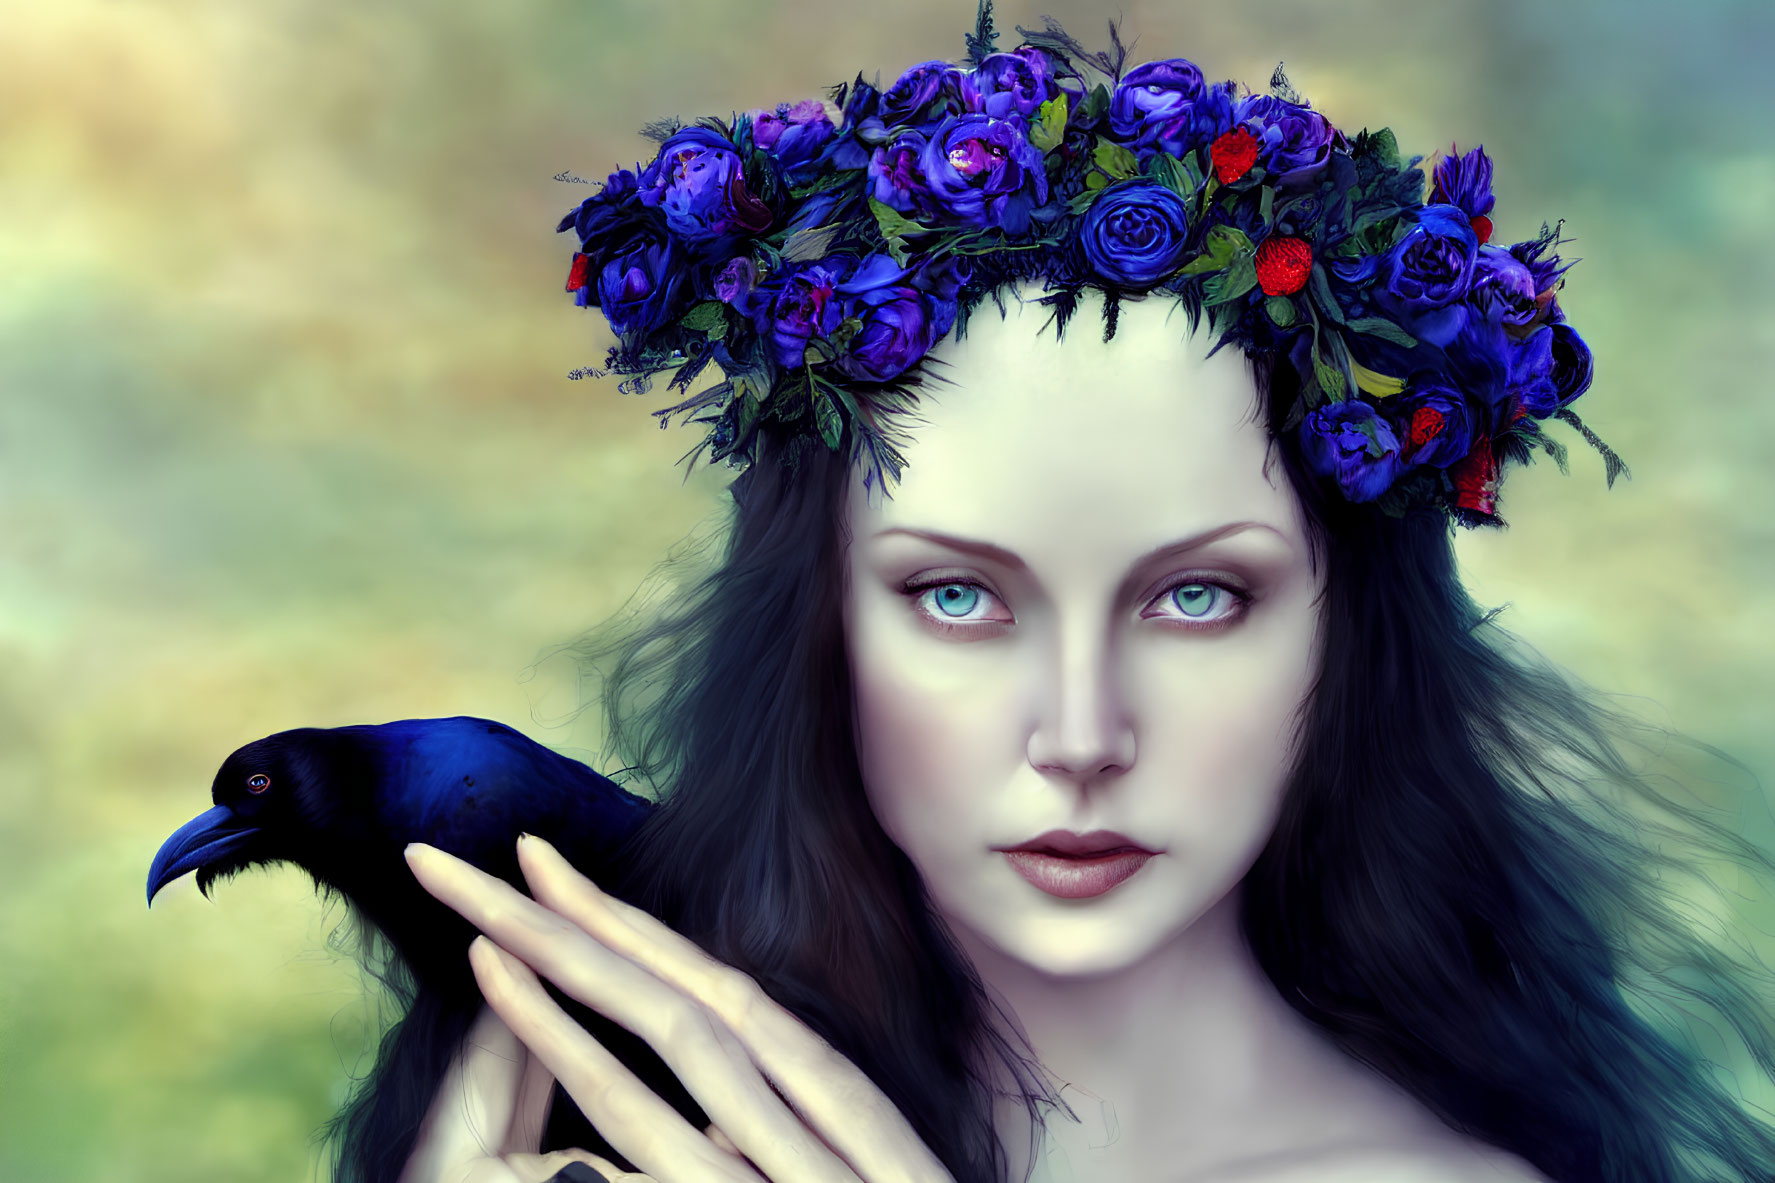 Woman with Blue Roses and Raven in Misty Background